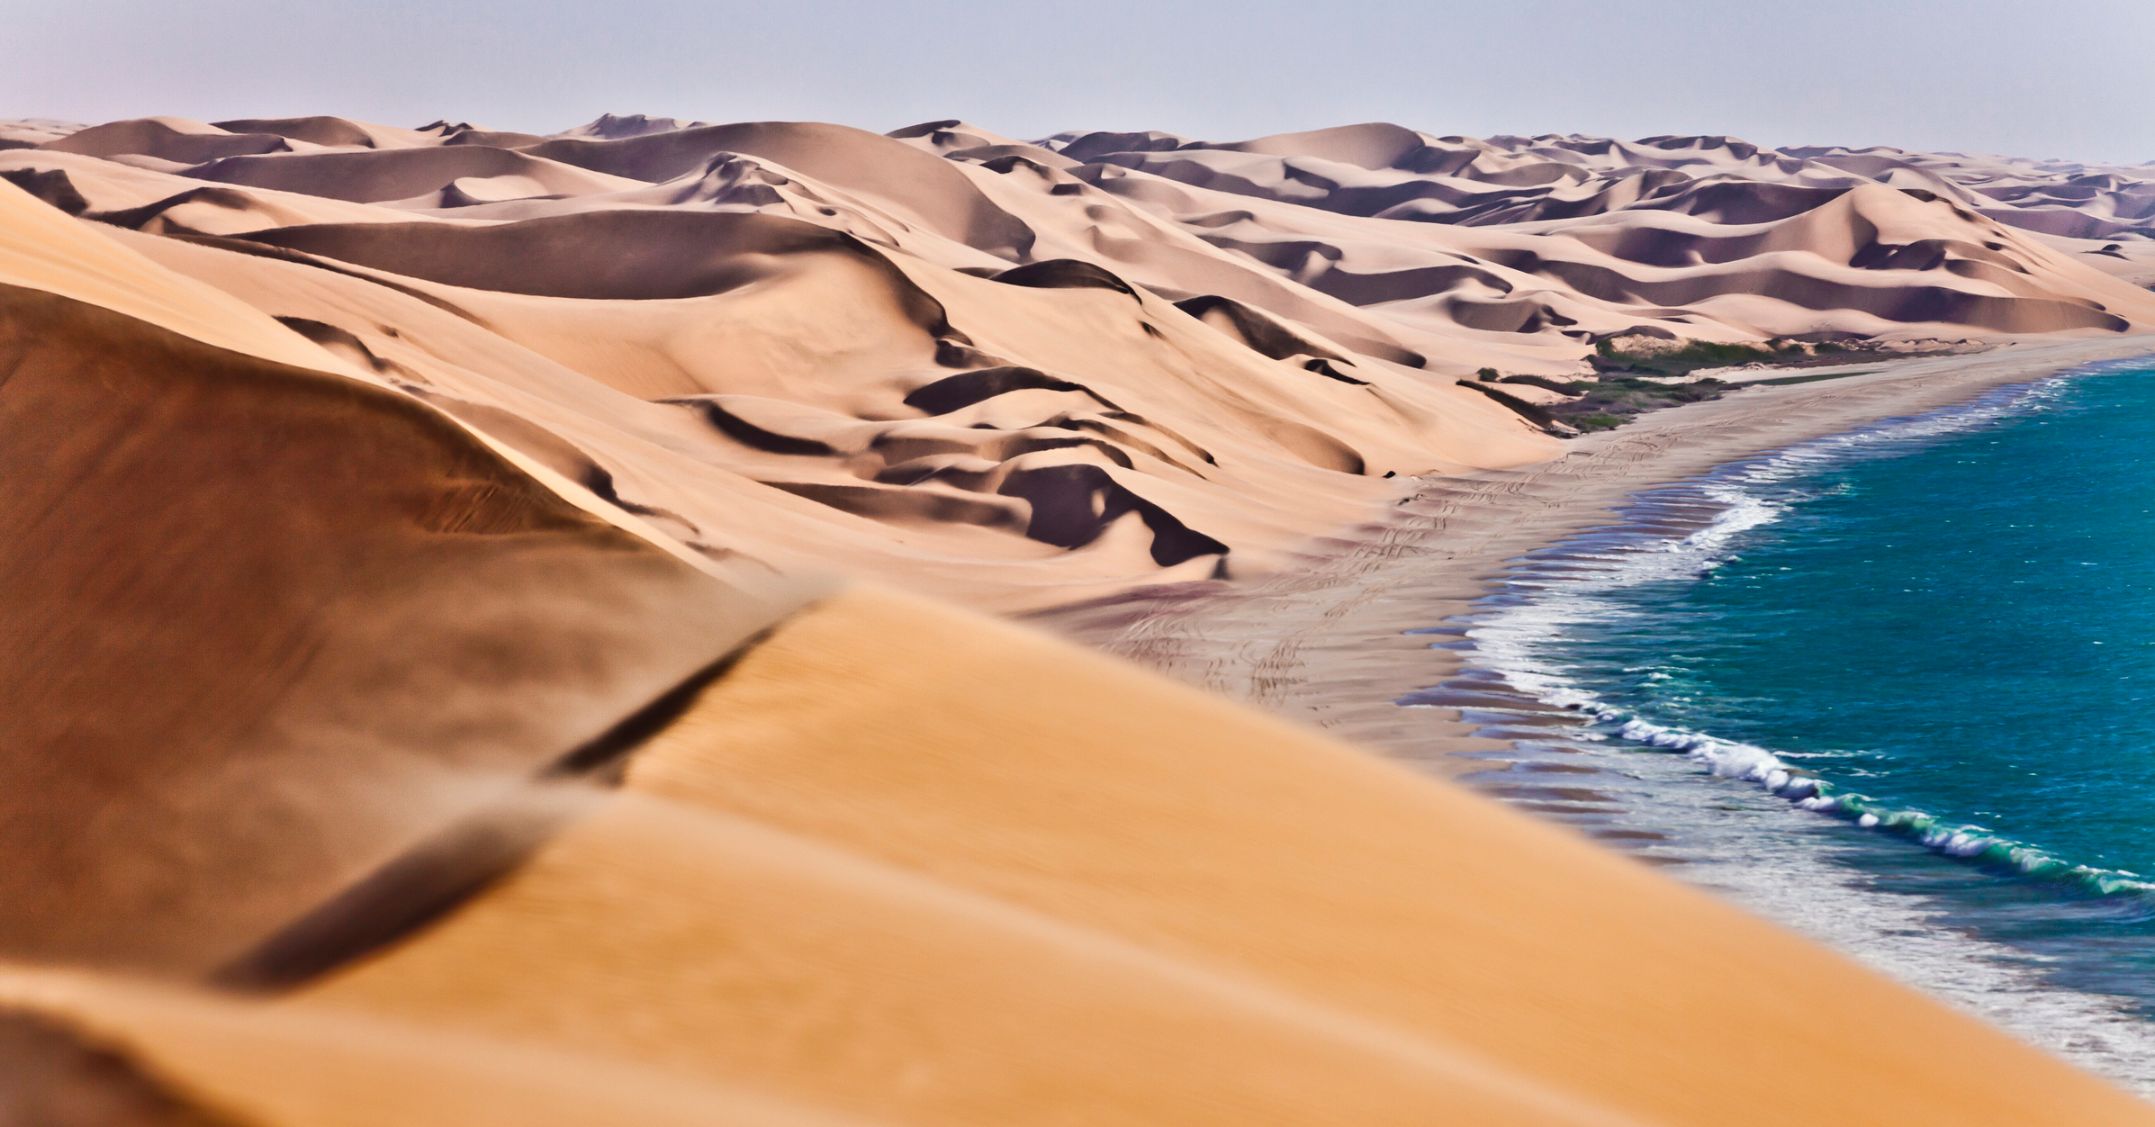 The sand dunes of the Namib Desert meeting the waves of the Atlantic in Namibia